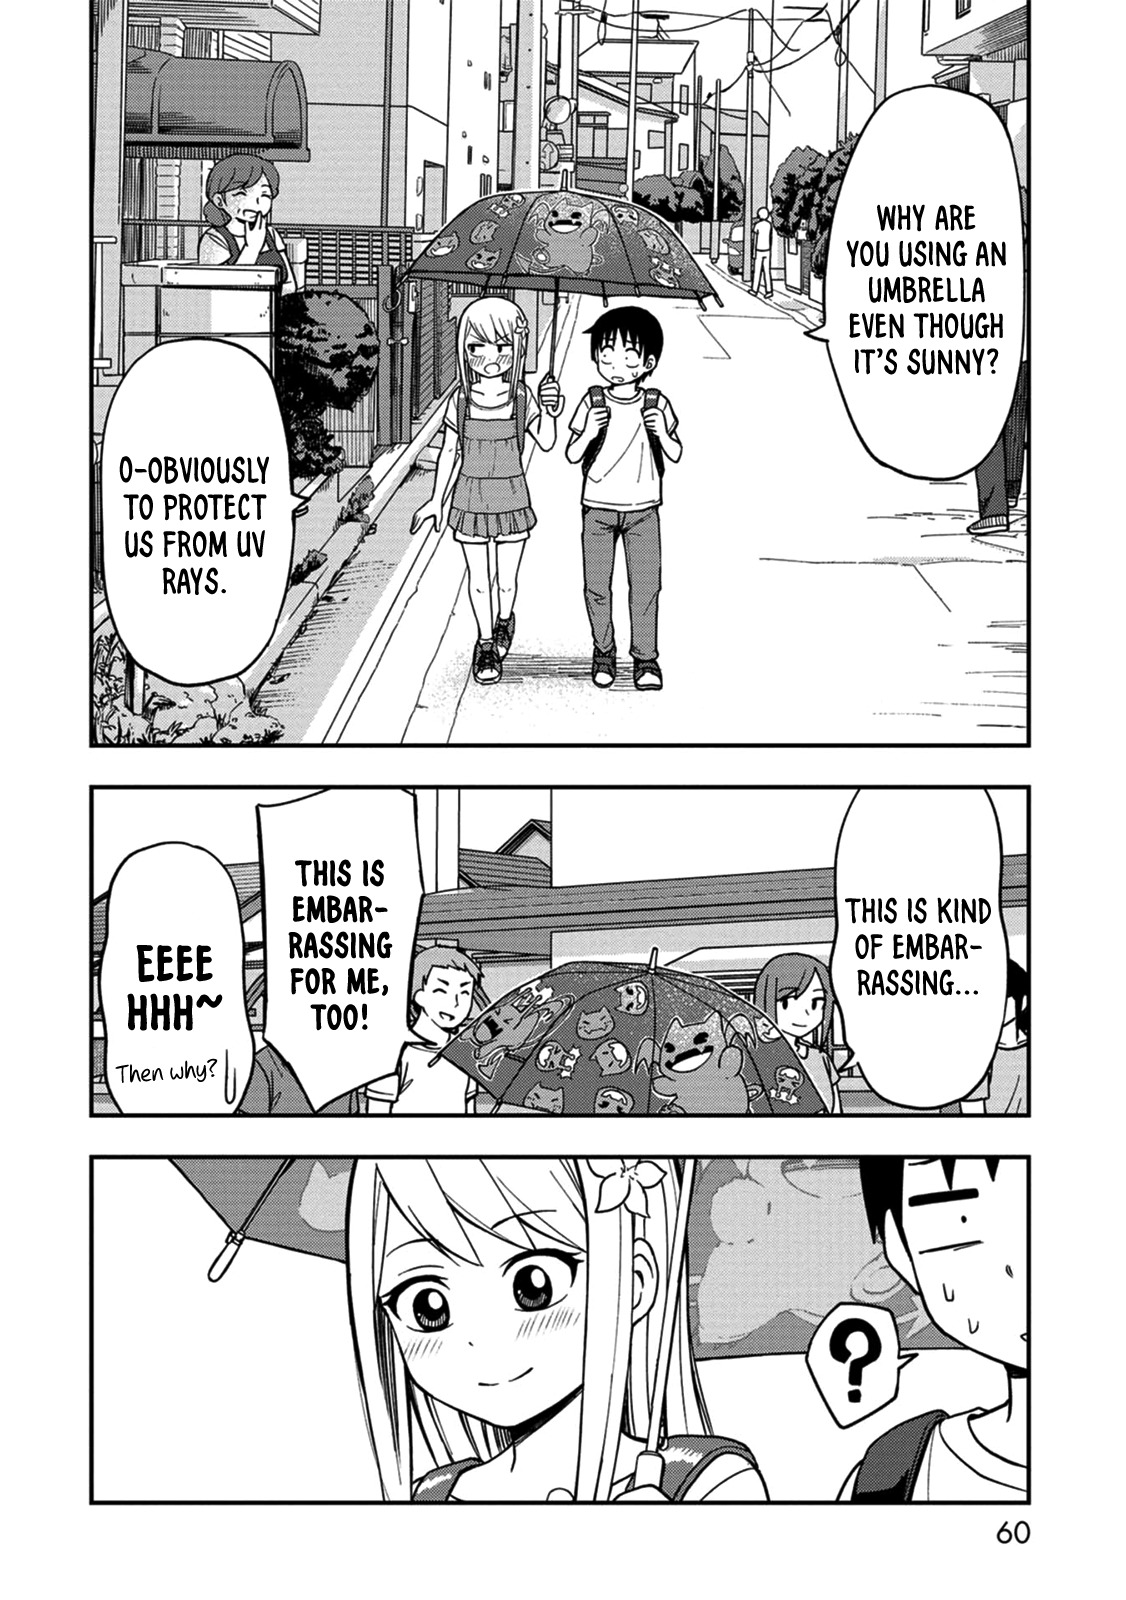 For Himeno-chan, Love Is (Still) Too Early vol.1 ch.6